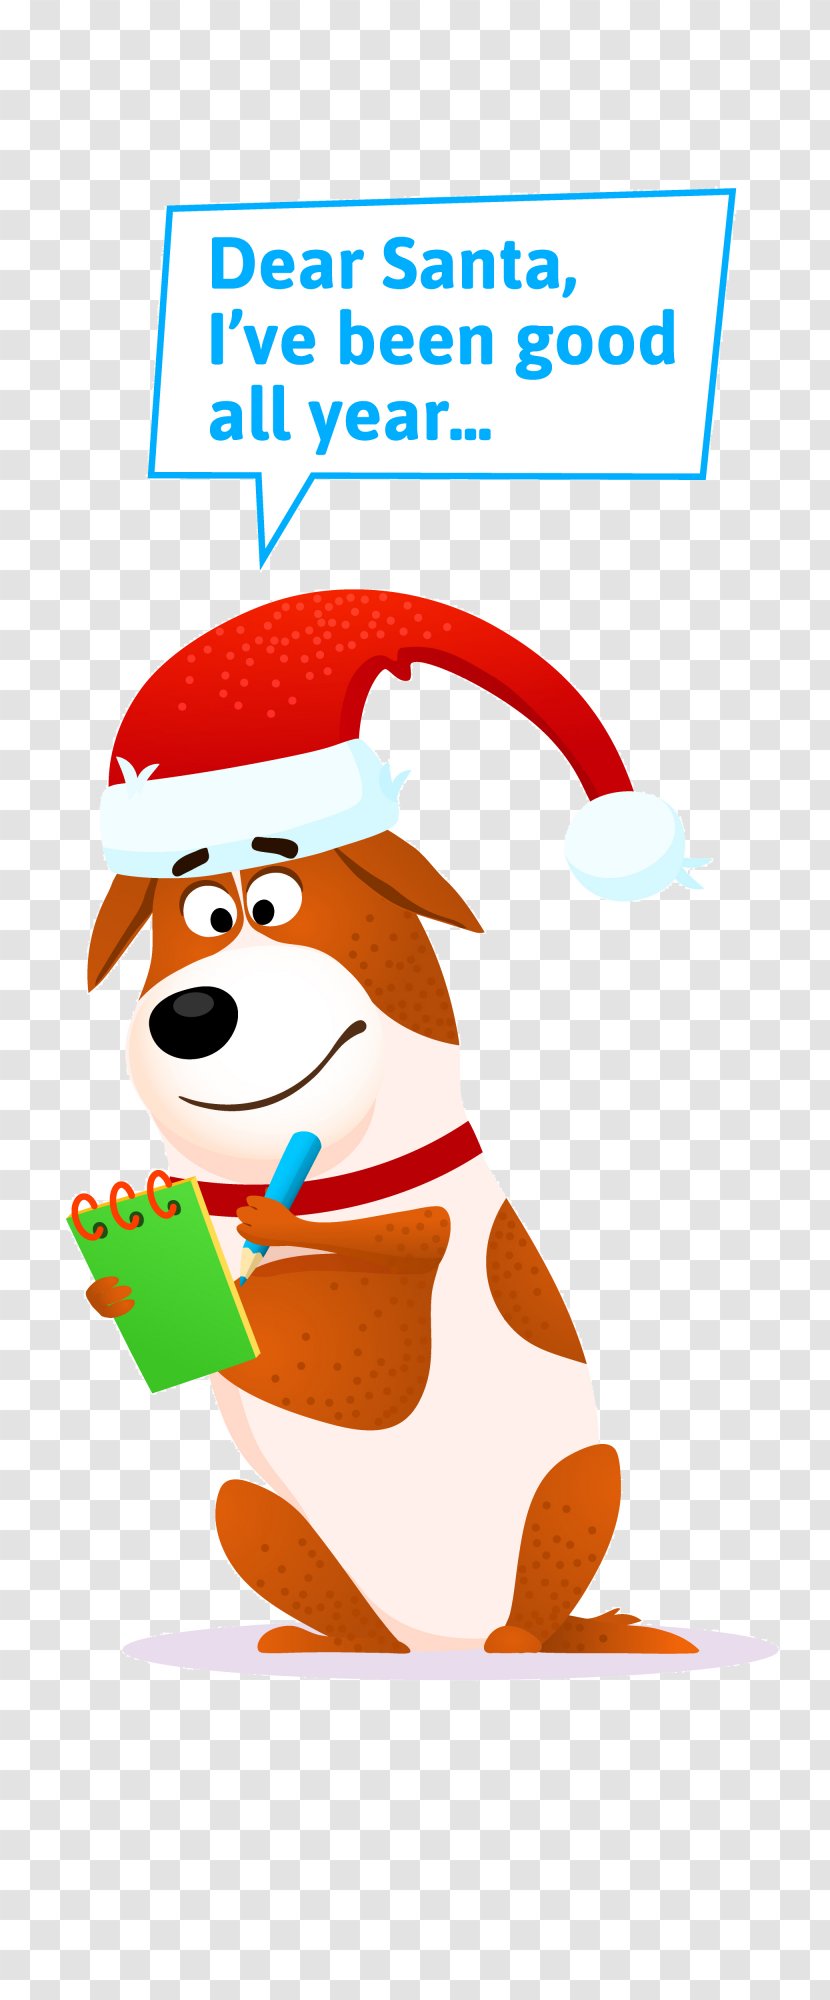 Santa Claus Illustration Christmas Day Cartoon Deer - Horn - Search For Paws Transparent PNG